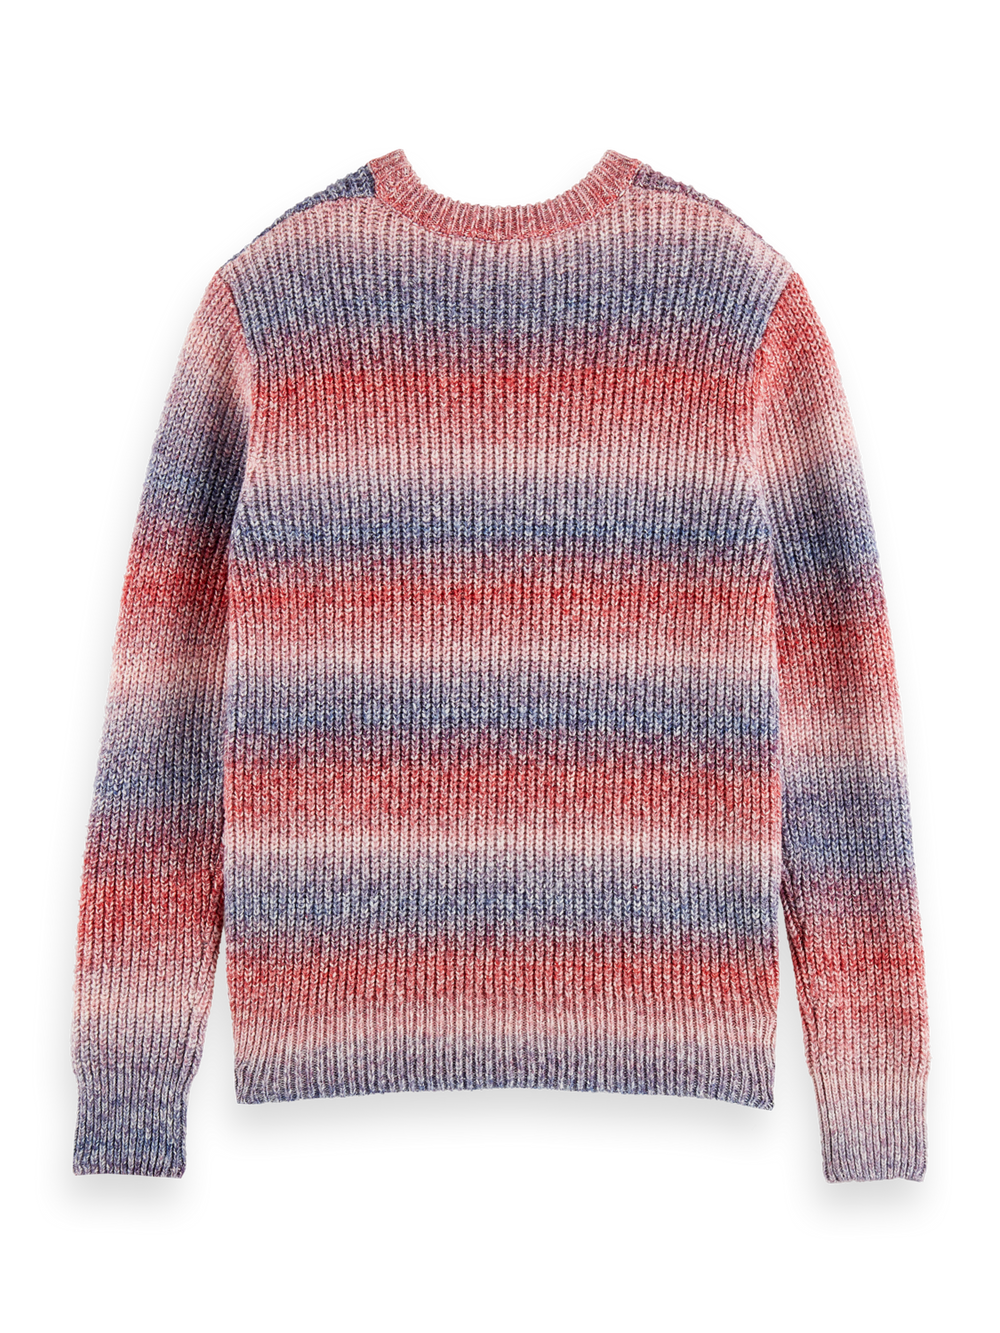 Crewneck Gradient Sweater Combo B 0218 | Buster McGee